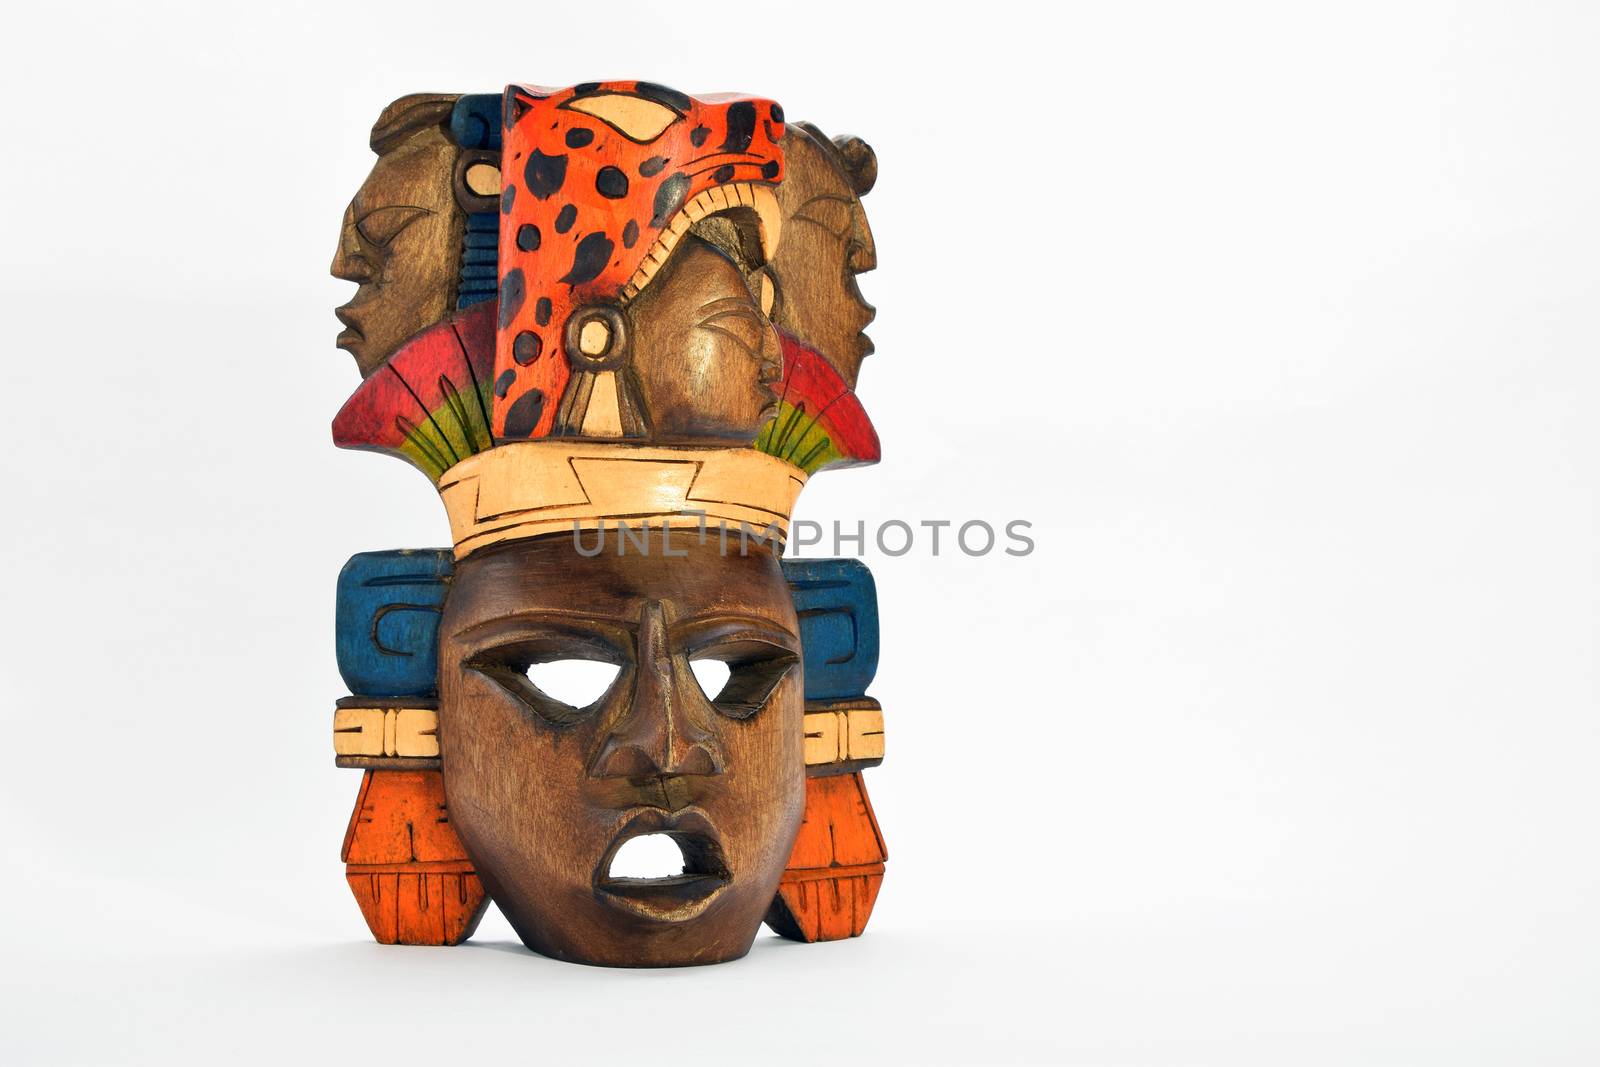 Indian Mayan Aztec wooden painted mask with roaring jaguar and h by BreakingTheWalls